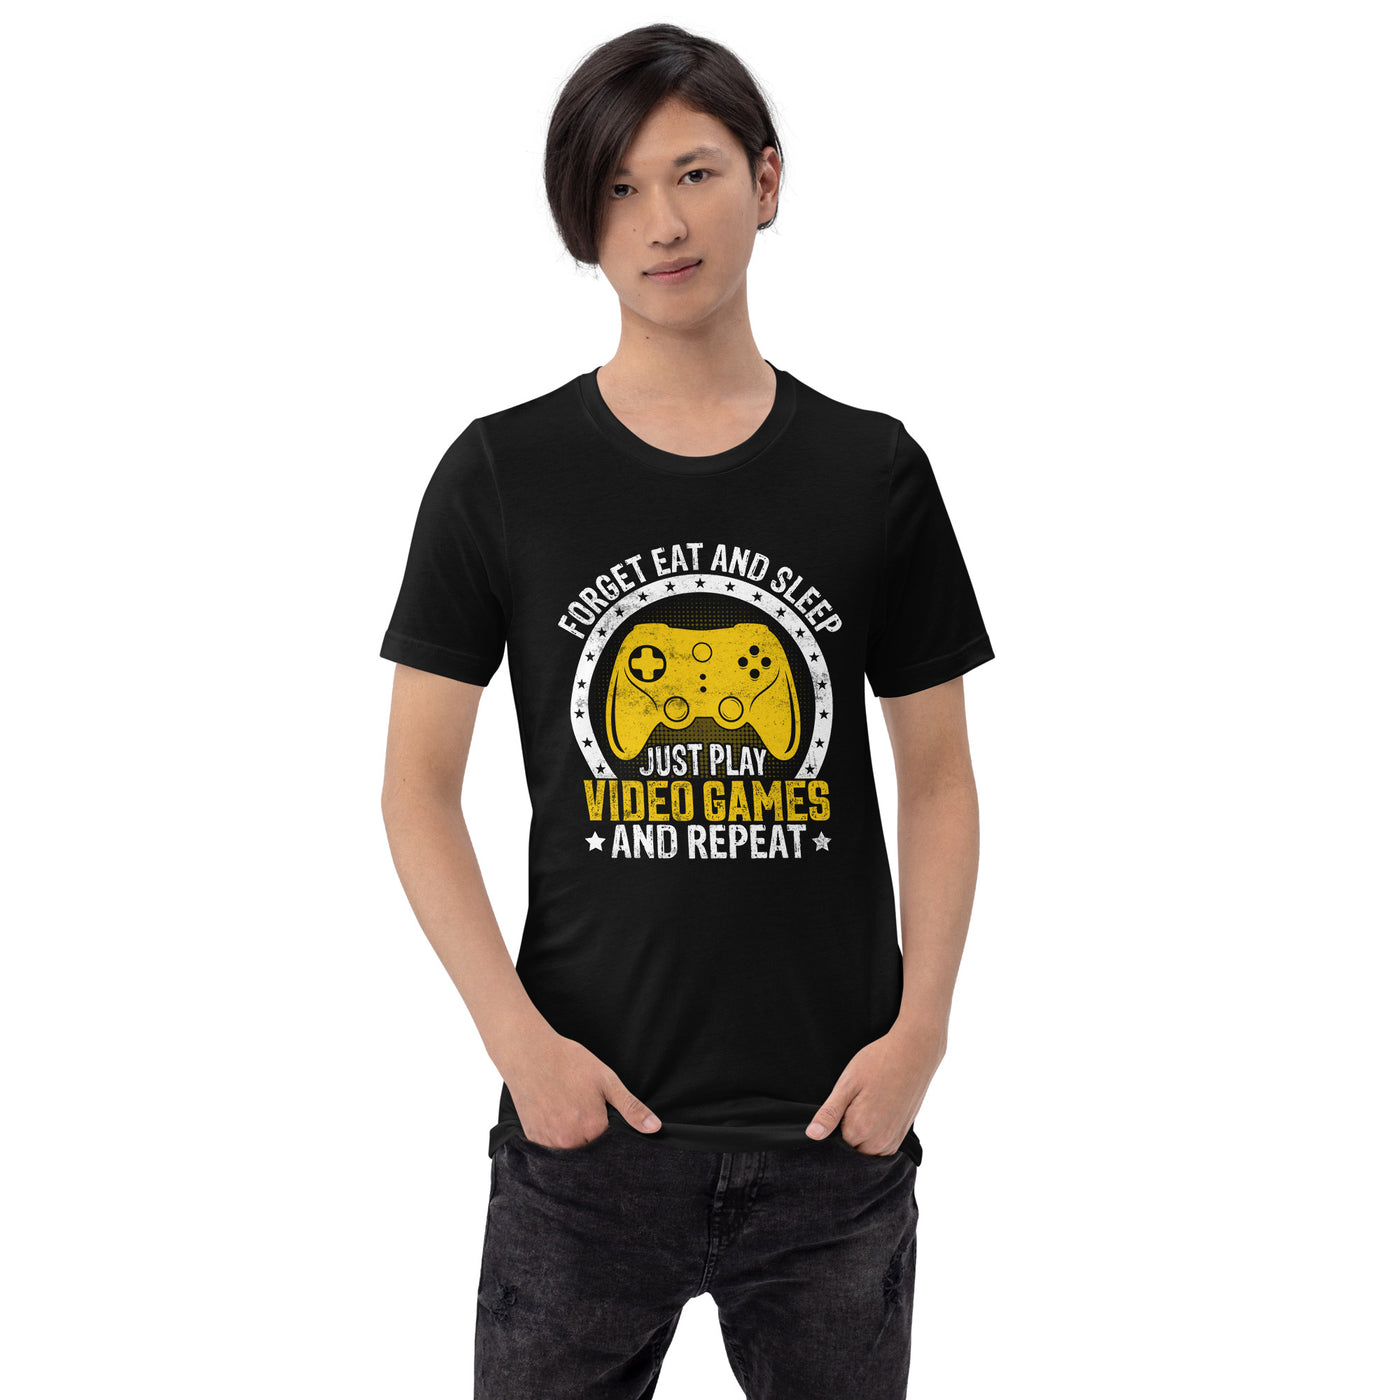 Forget Eat and Sleep, just Play Video Games and Repeat Unisex t-shirt